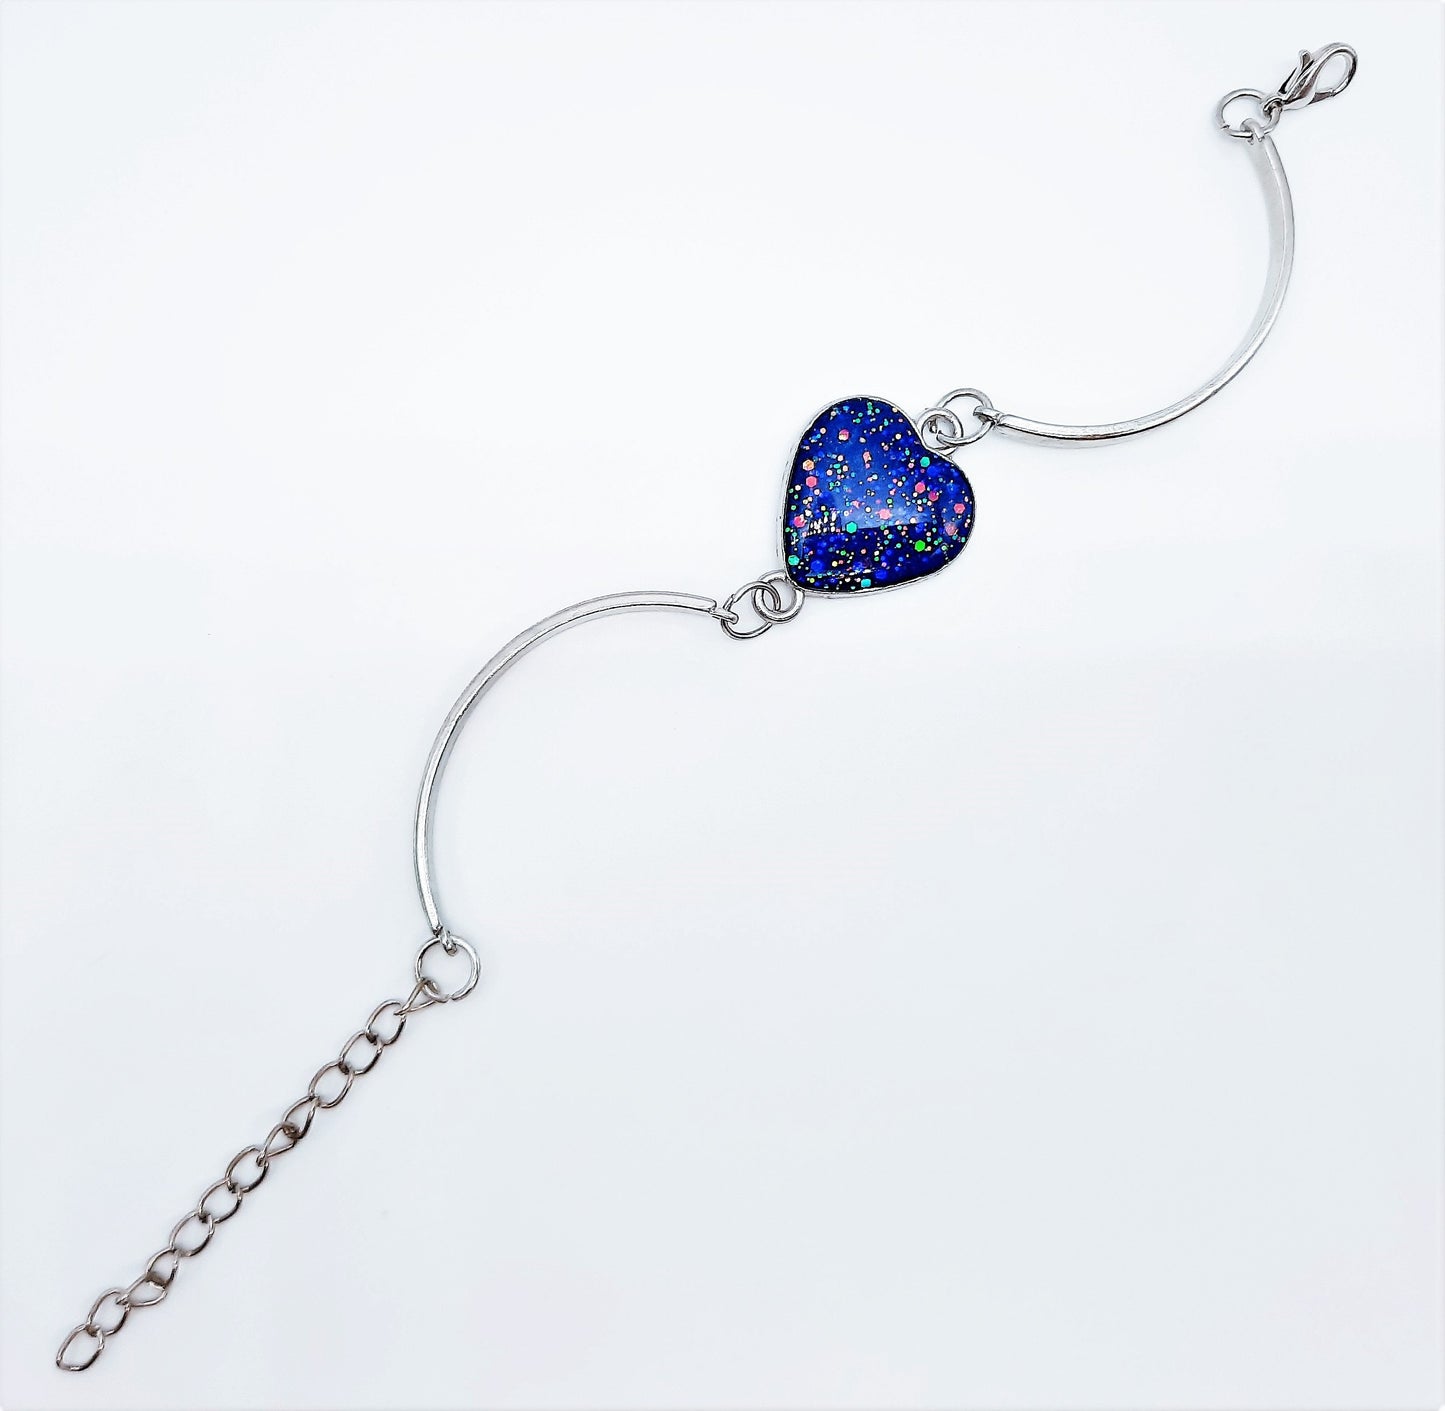 Handcrafted Iridescent Blue Heart Adjustable Bangle Bracelet-Made with Resin, Glitter, & Holographic Powder-Hypoallergenic Stainless Steel